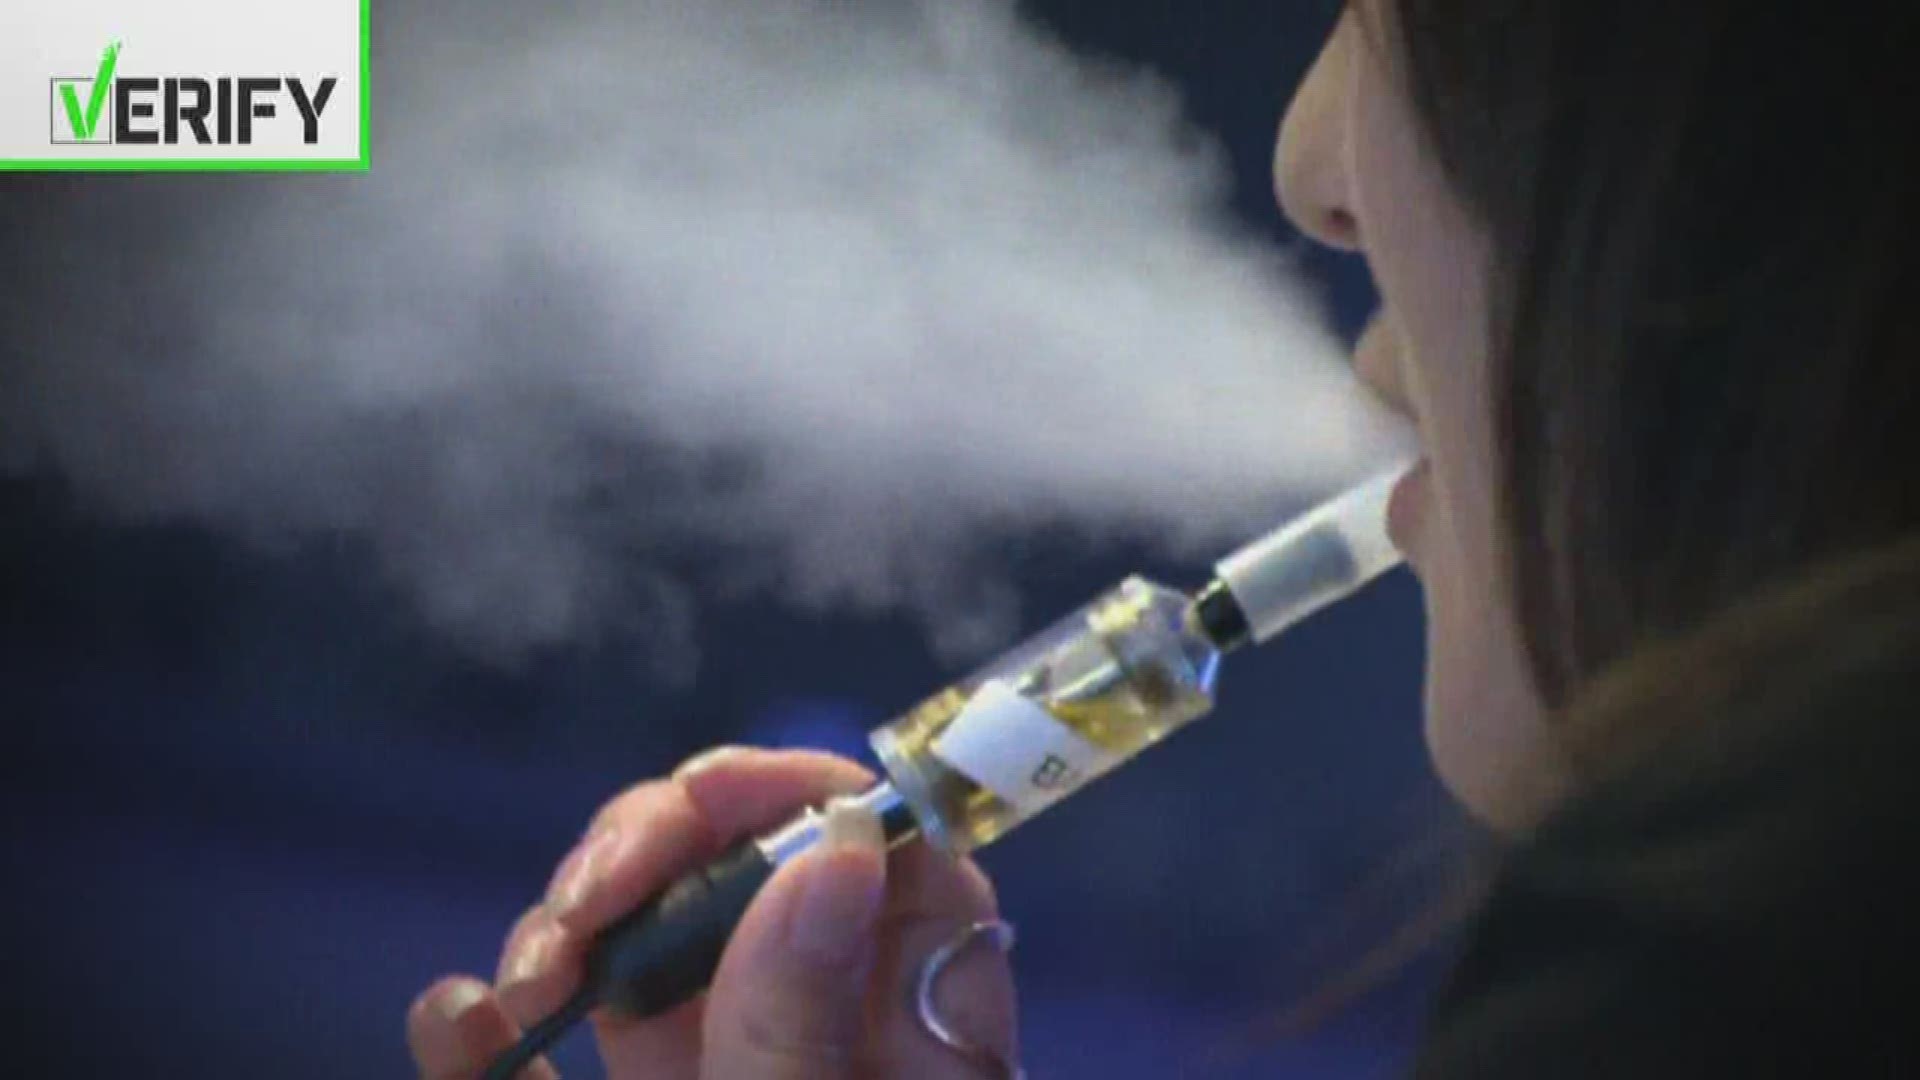 Health officials in more than 30 states are investigating reports of people getting sick and even dying after using e-cigarettes. At least six deaths nationwide are being blamed on vaping. No deaths have been reported in Arizona, but the federal government and private health advocates are warning people about the dangers.